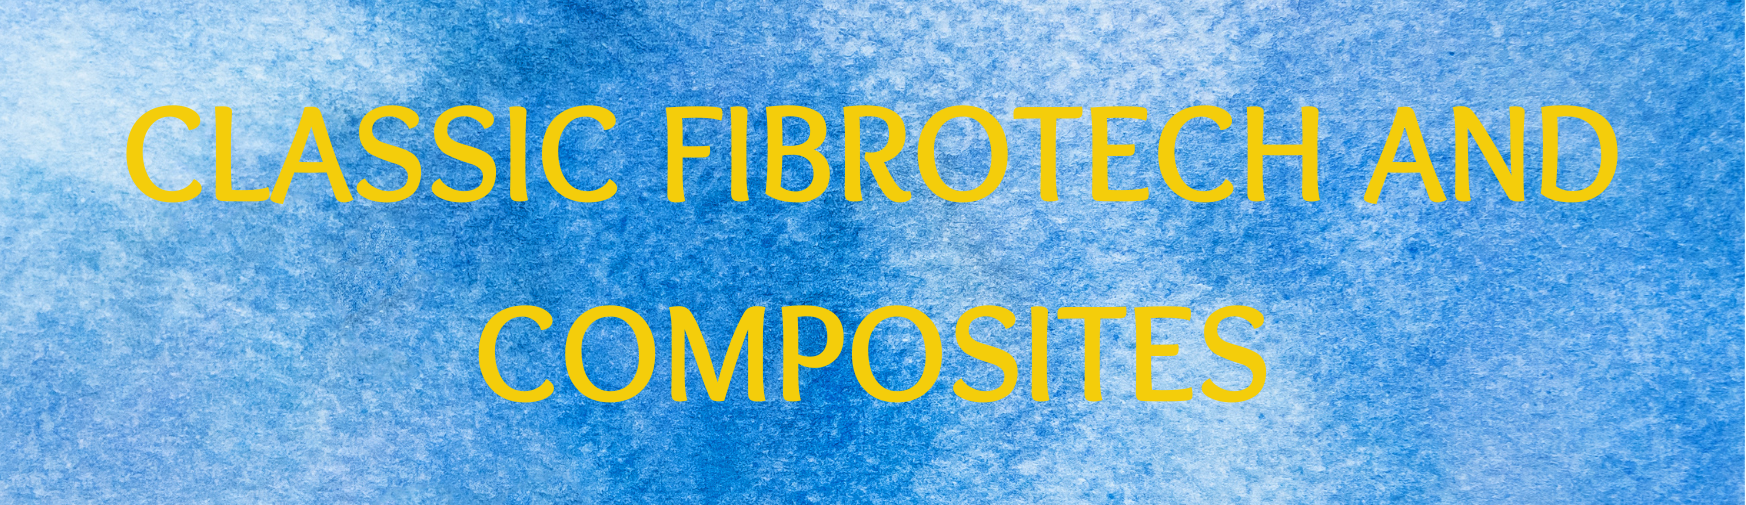 Classic Fibrotech And Composites.